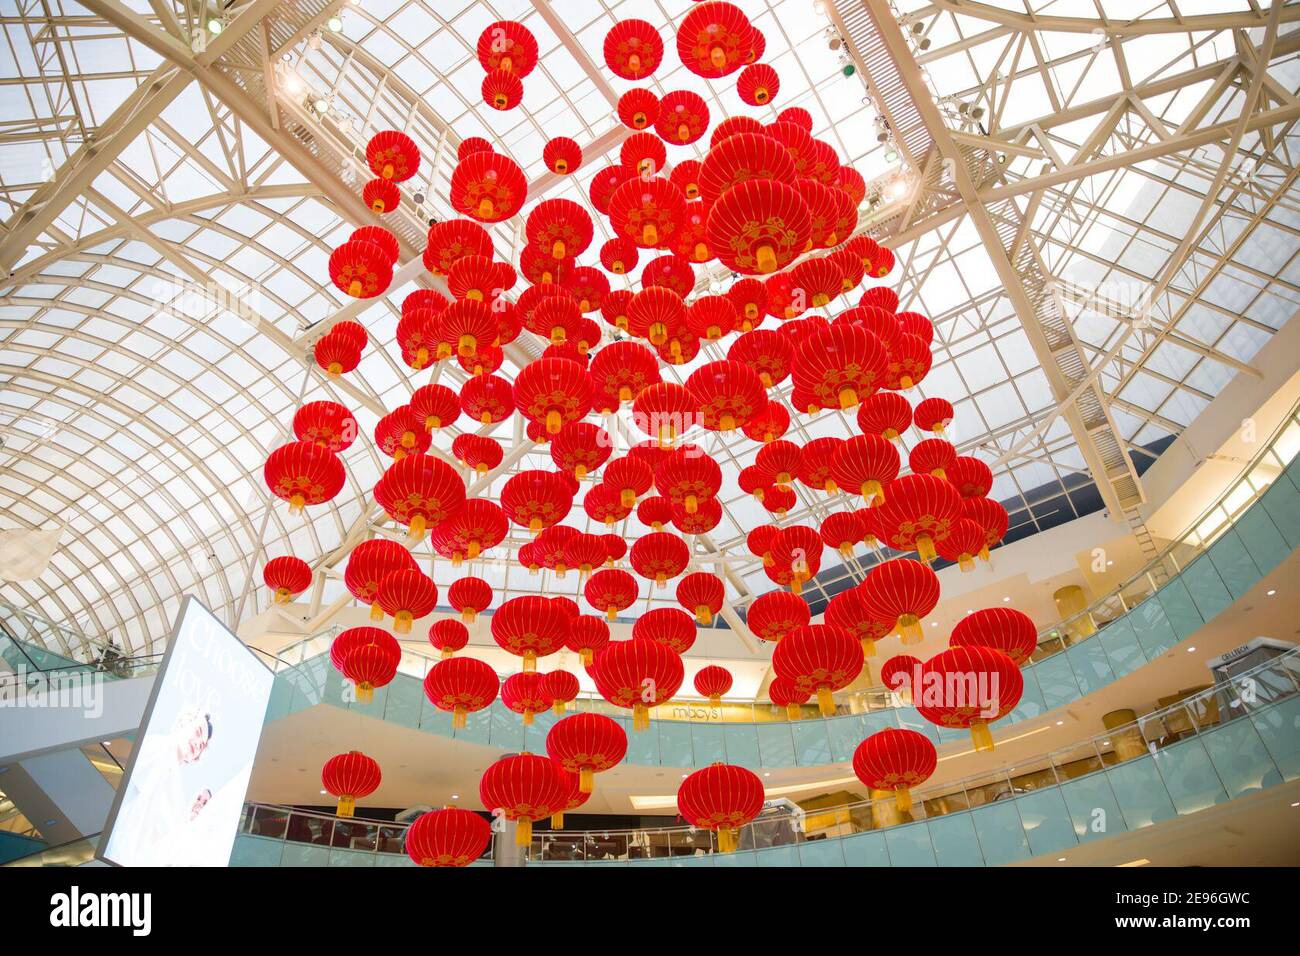 Dallas, USA. 2nd Feb, 2021. Red lanterns are seen in Galleria Dallas shopping mall in Dallas, Texas, the United States, on Feb. 2, 2021. Over 200 red lanterns, as decorations for the upcoming Chinese Lunar New Year, are hung above the shopping mall's ice skating rink from Feb. 2 to March 2. Credit: Dan Tian/Xinhua/Alamy Live News Stock Photo